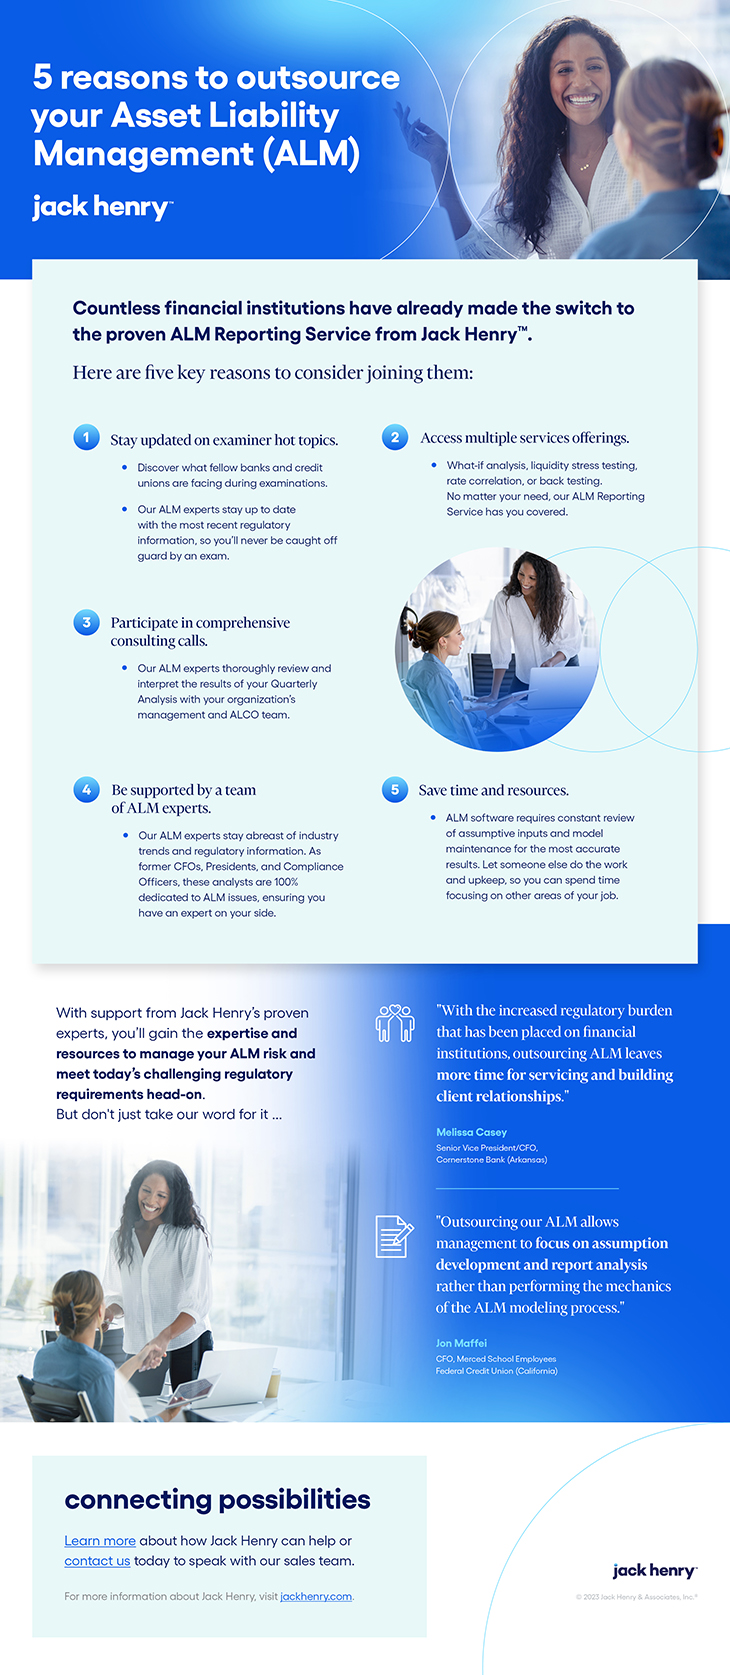 jh-infographic-operations-alm-profit-reporting-service-fy23